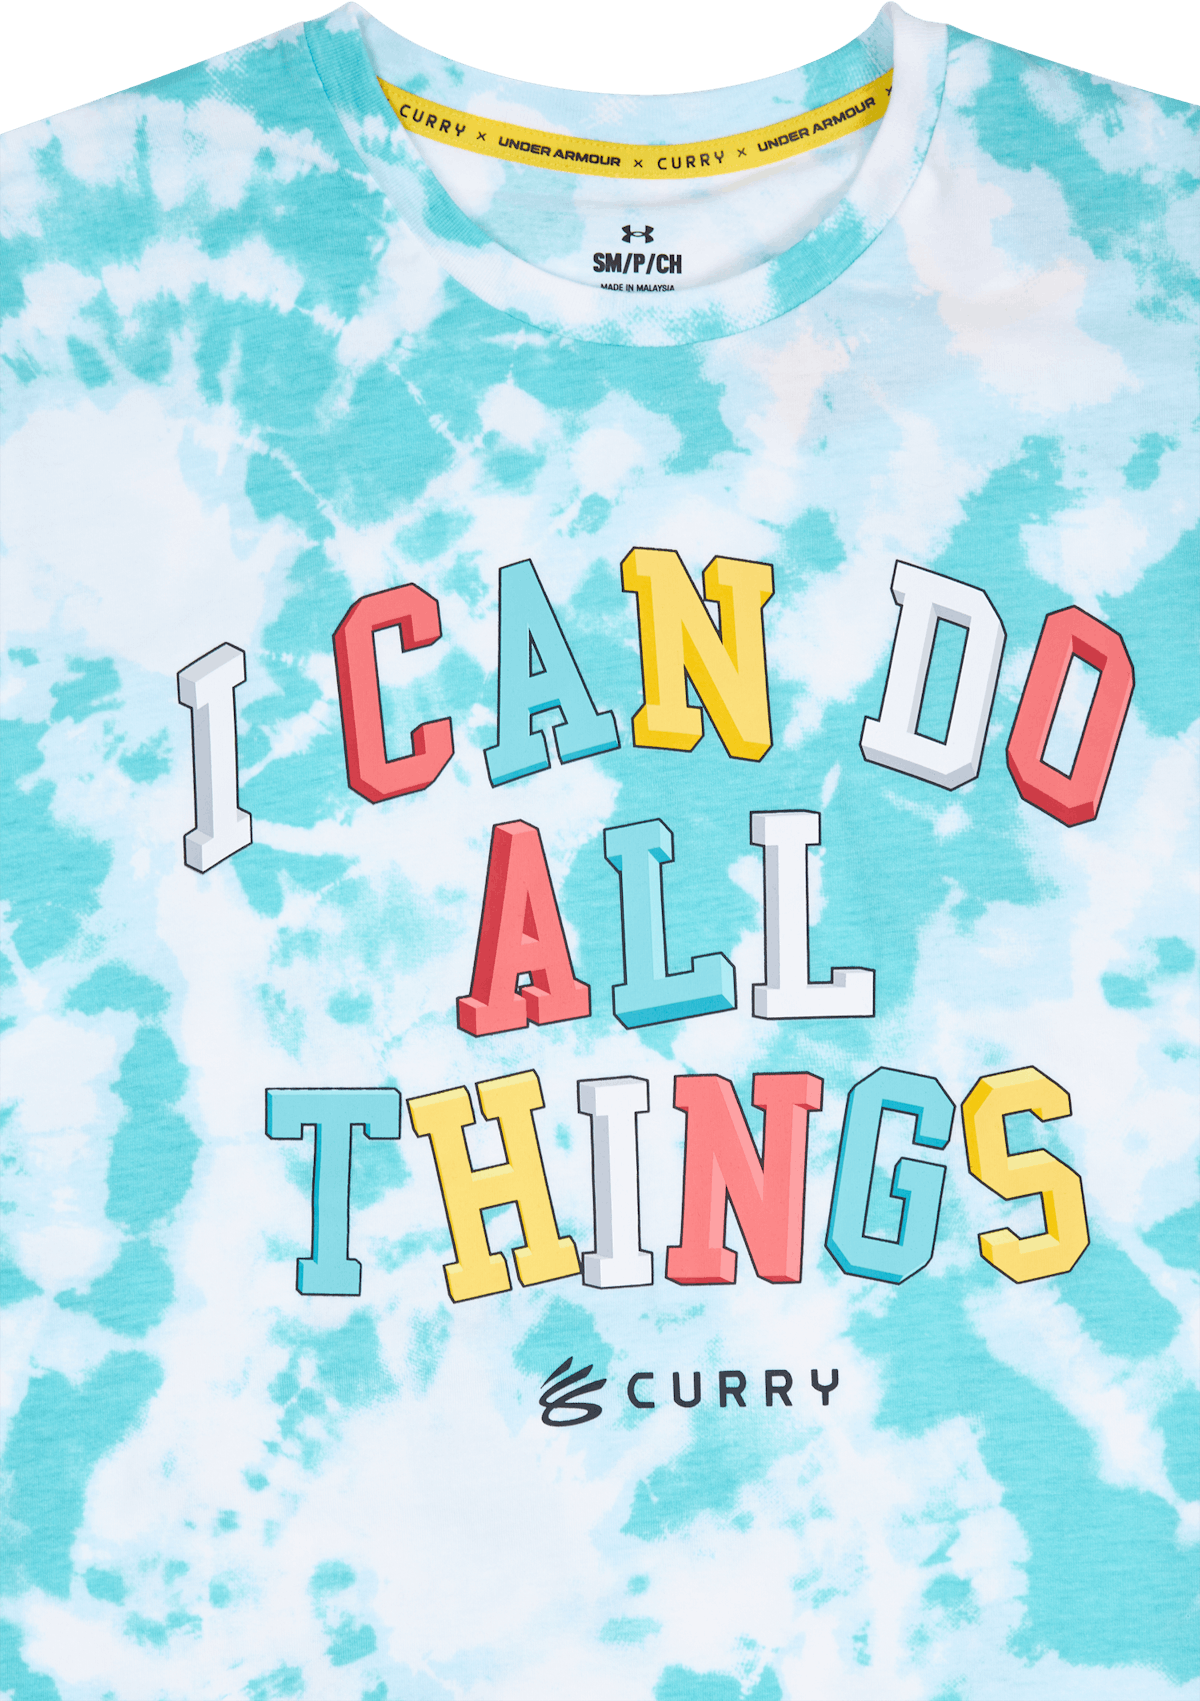 UA Curry "I Can Do All Things"